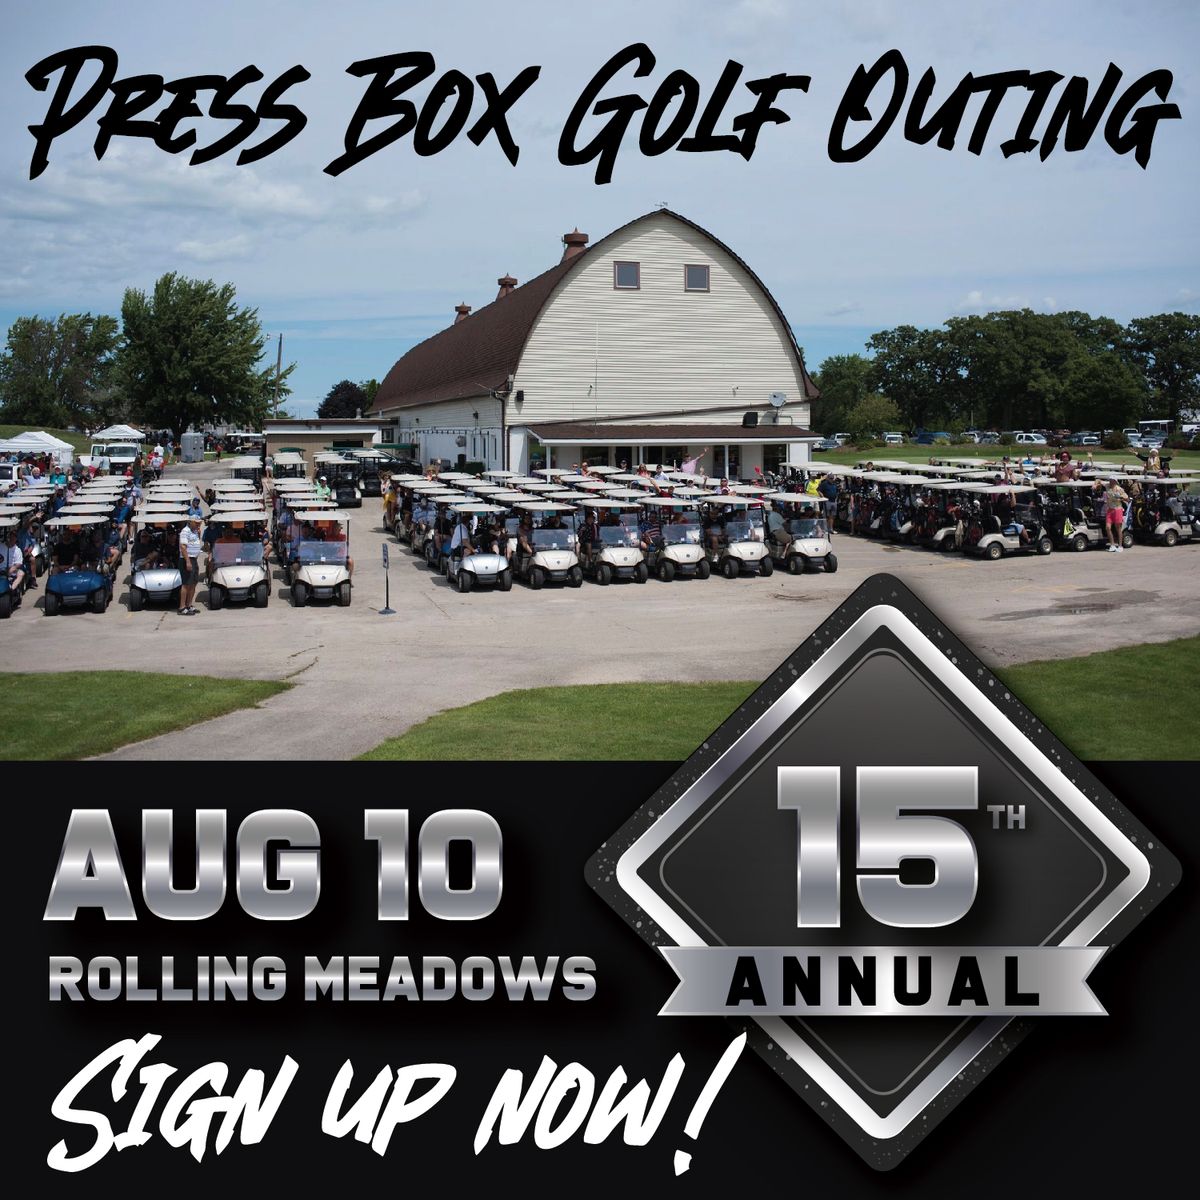 15 Years! Press Box Annual Golf Outing